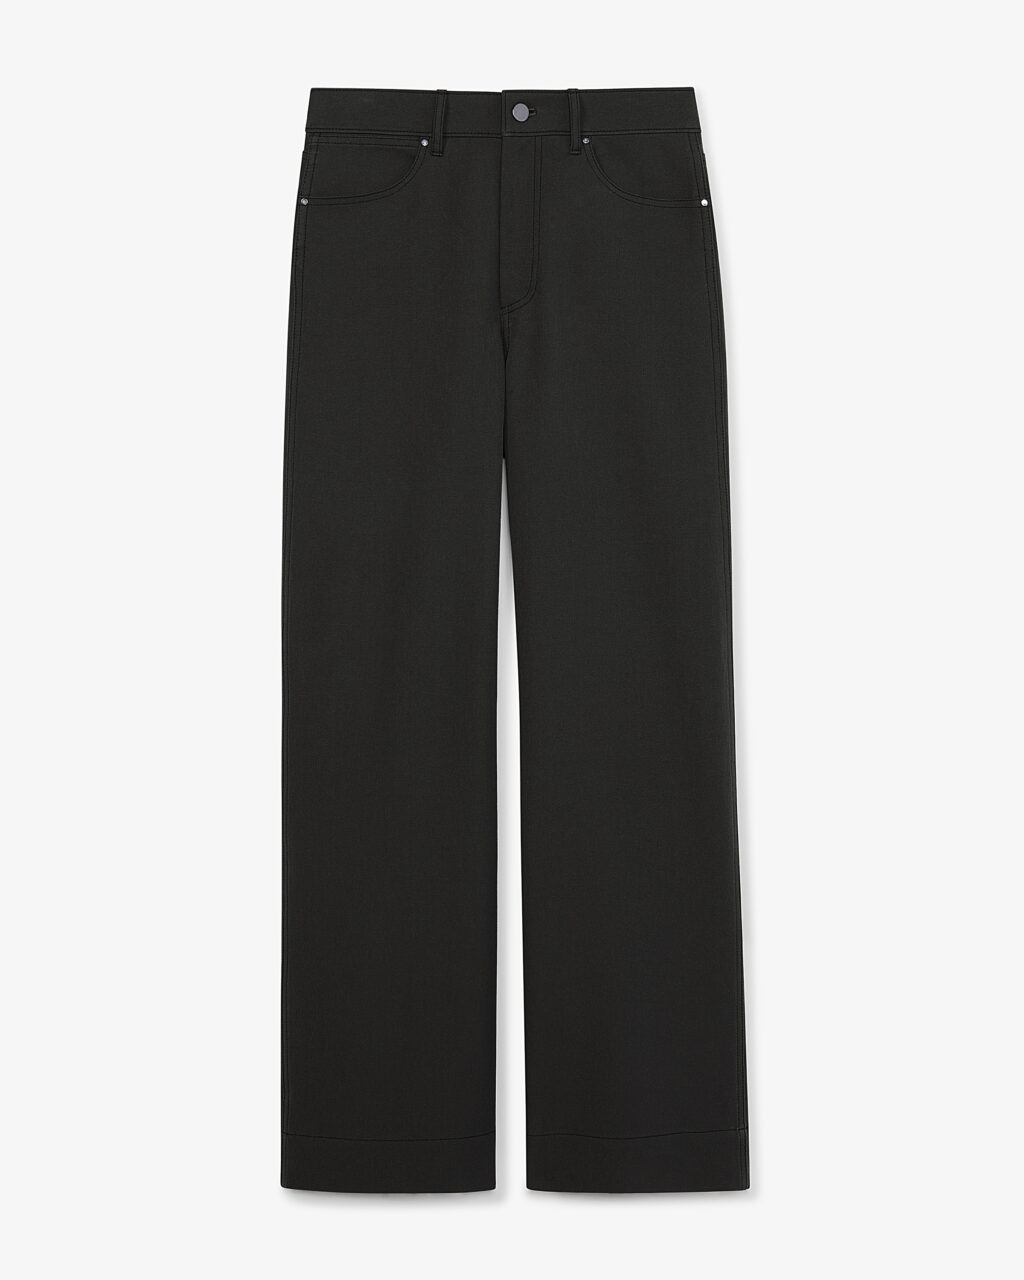 The Best Pants for When You're In-Between Sizes